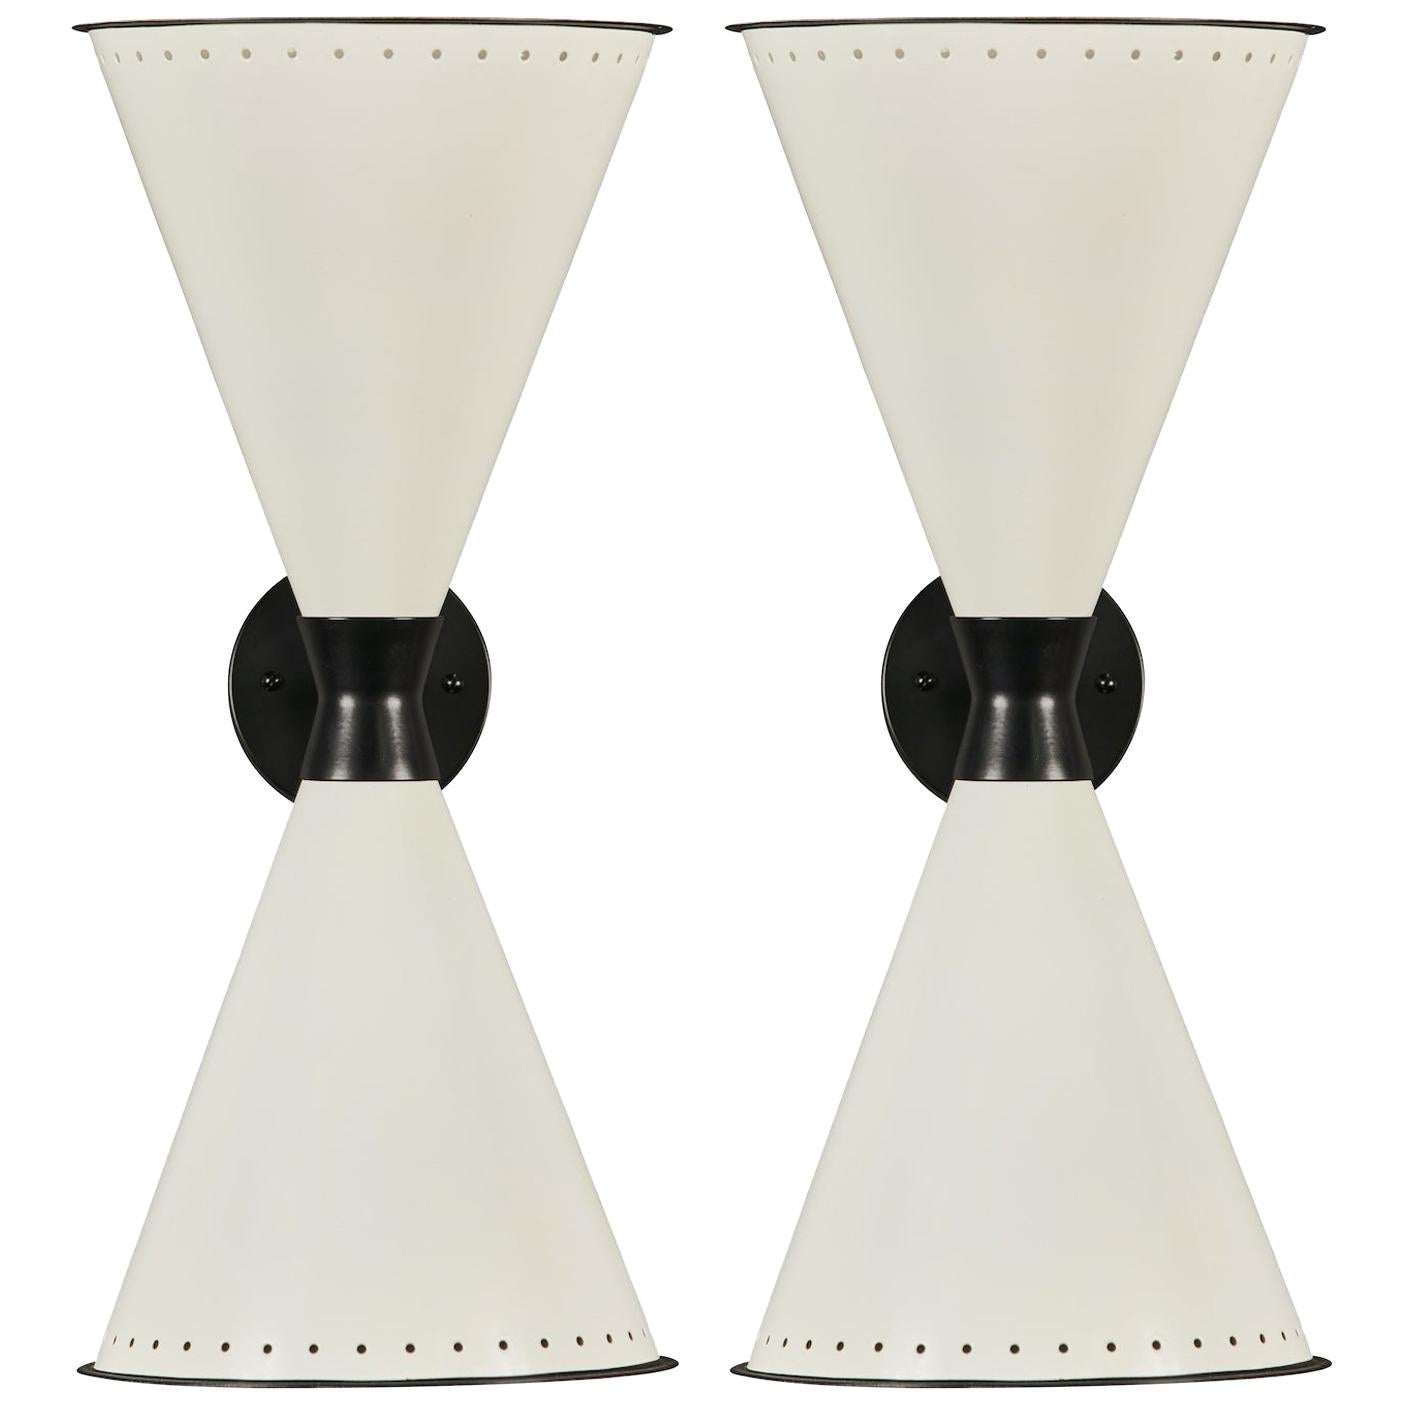 Monumental 'Diabolo' condition perforated double-cone sconce in white and black. Handcrafted in Los Angeles with scrupulous attention to detail and materials. Executed in high quality lacquered metal perforated shades, this ultra-refined design adds